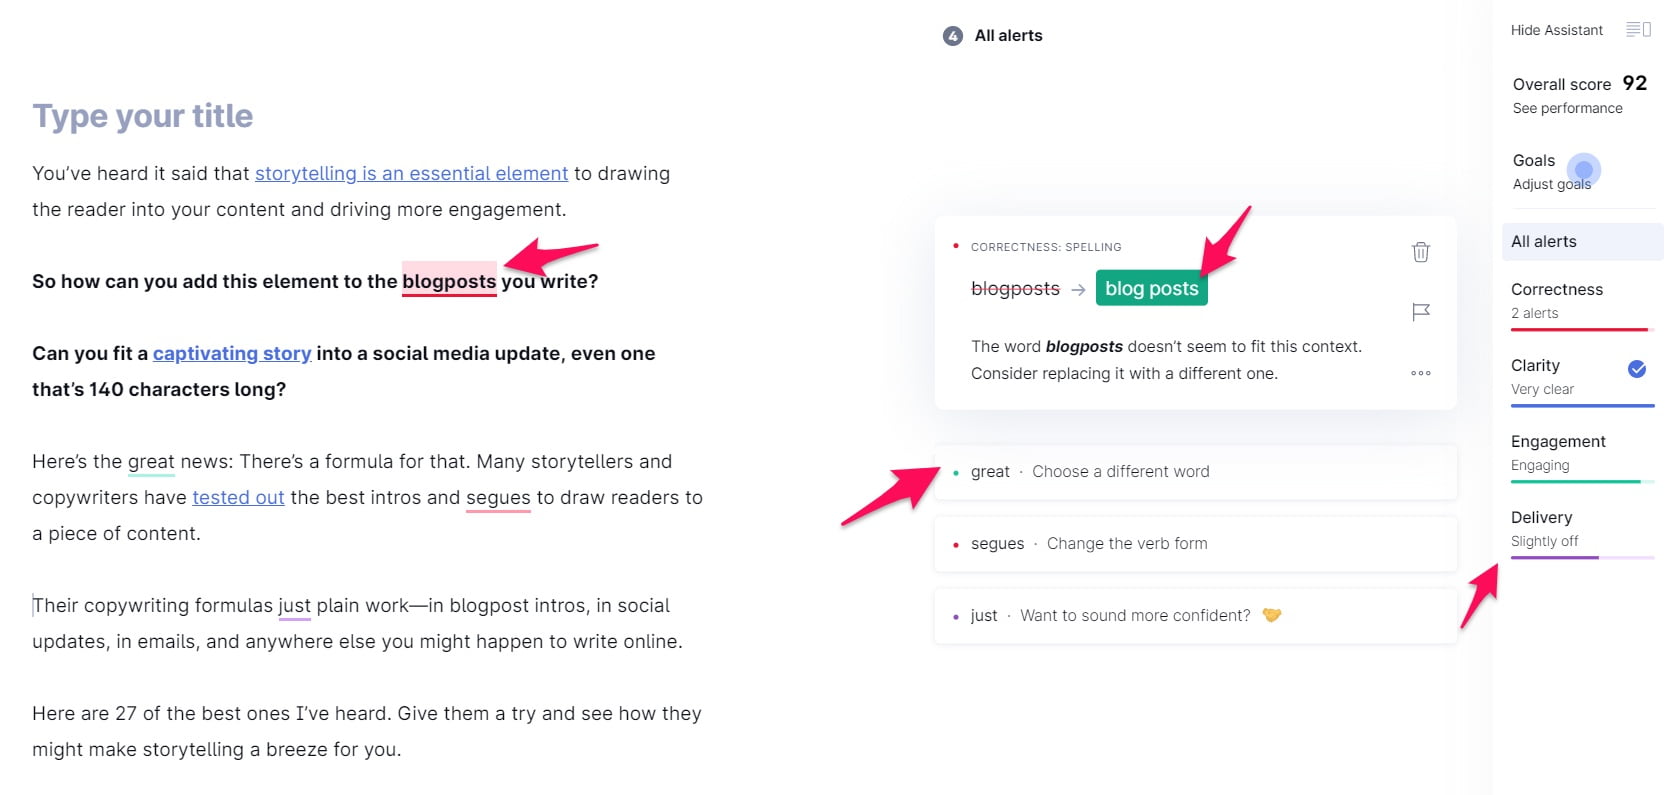 Grammarly results page